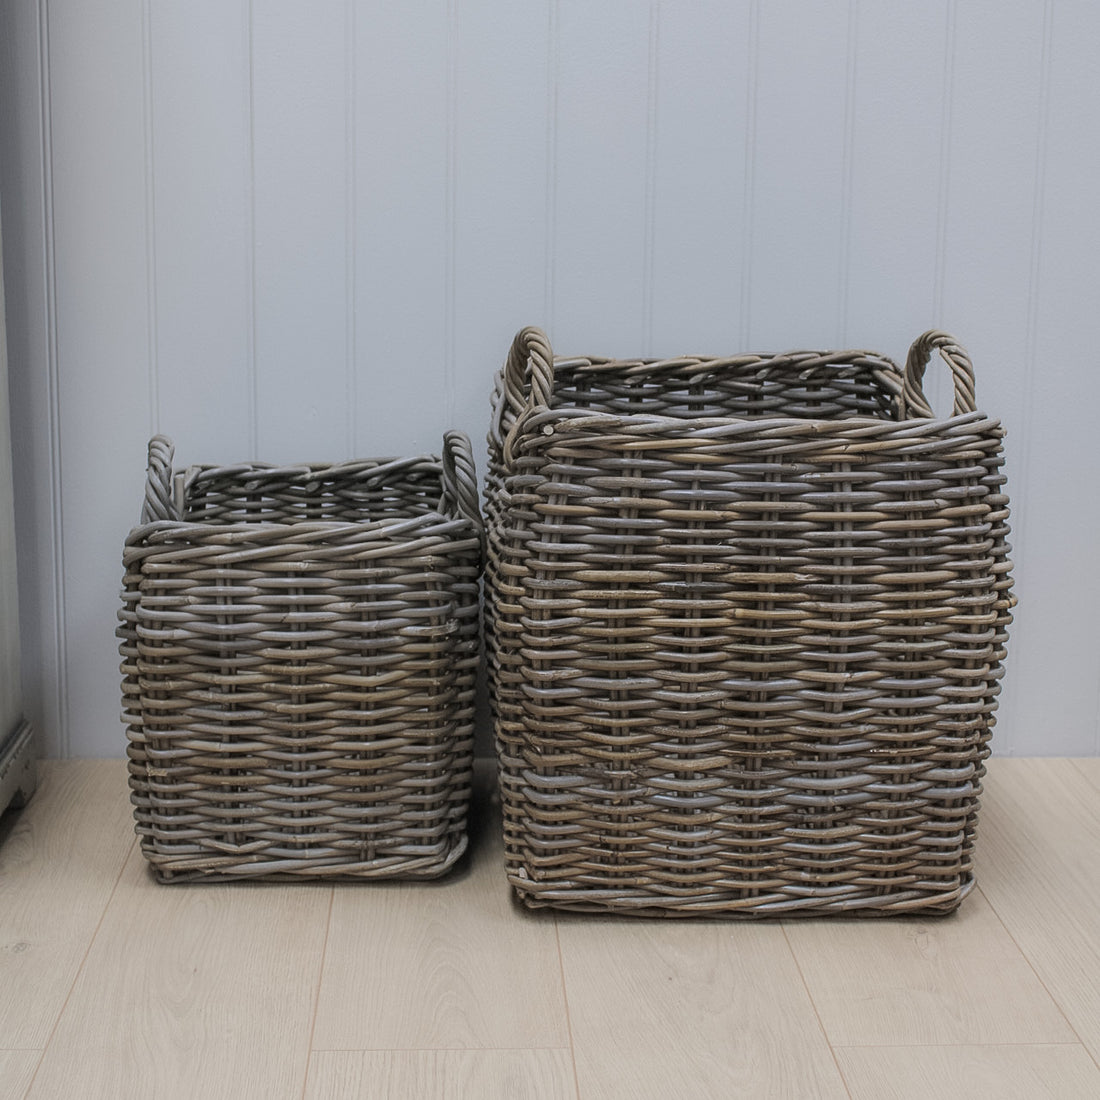 Curved Grey Washed Rattan Basket with Handles